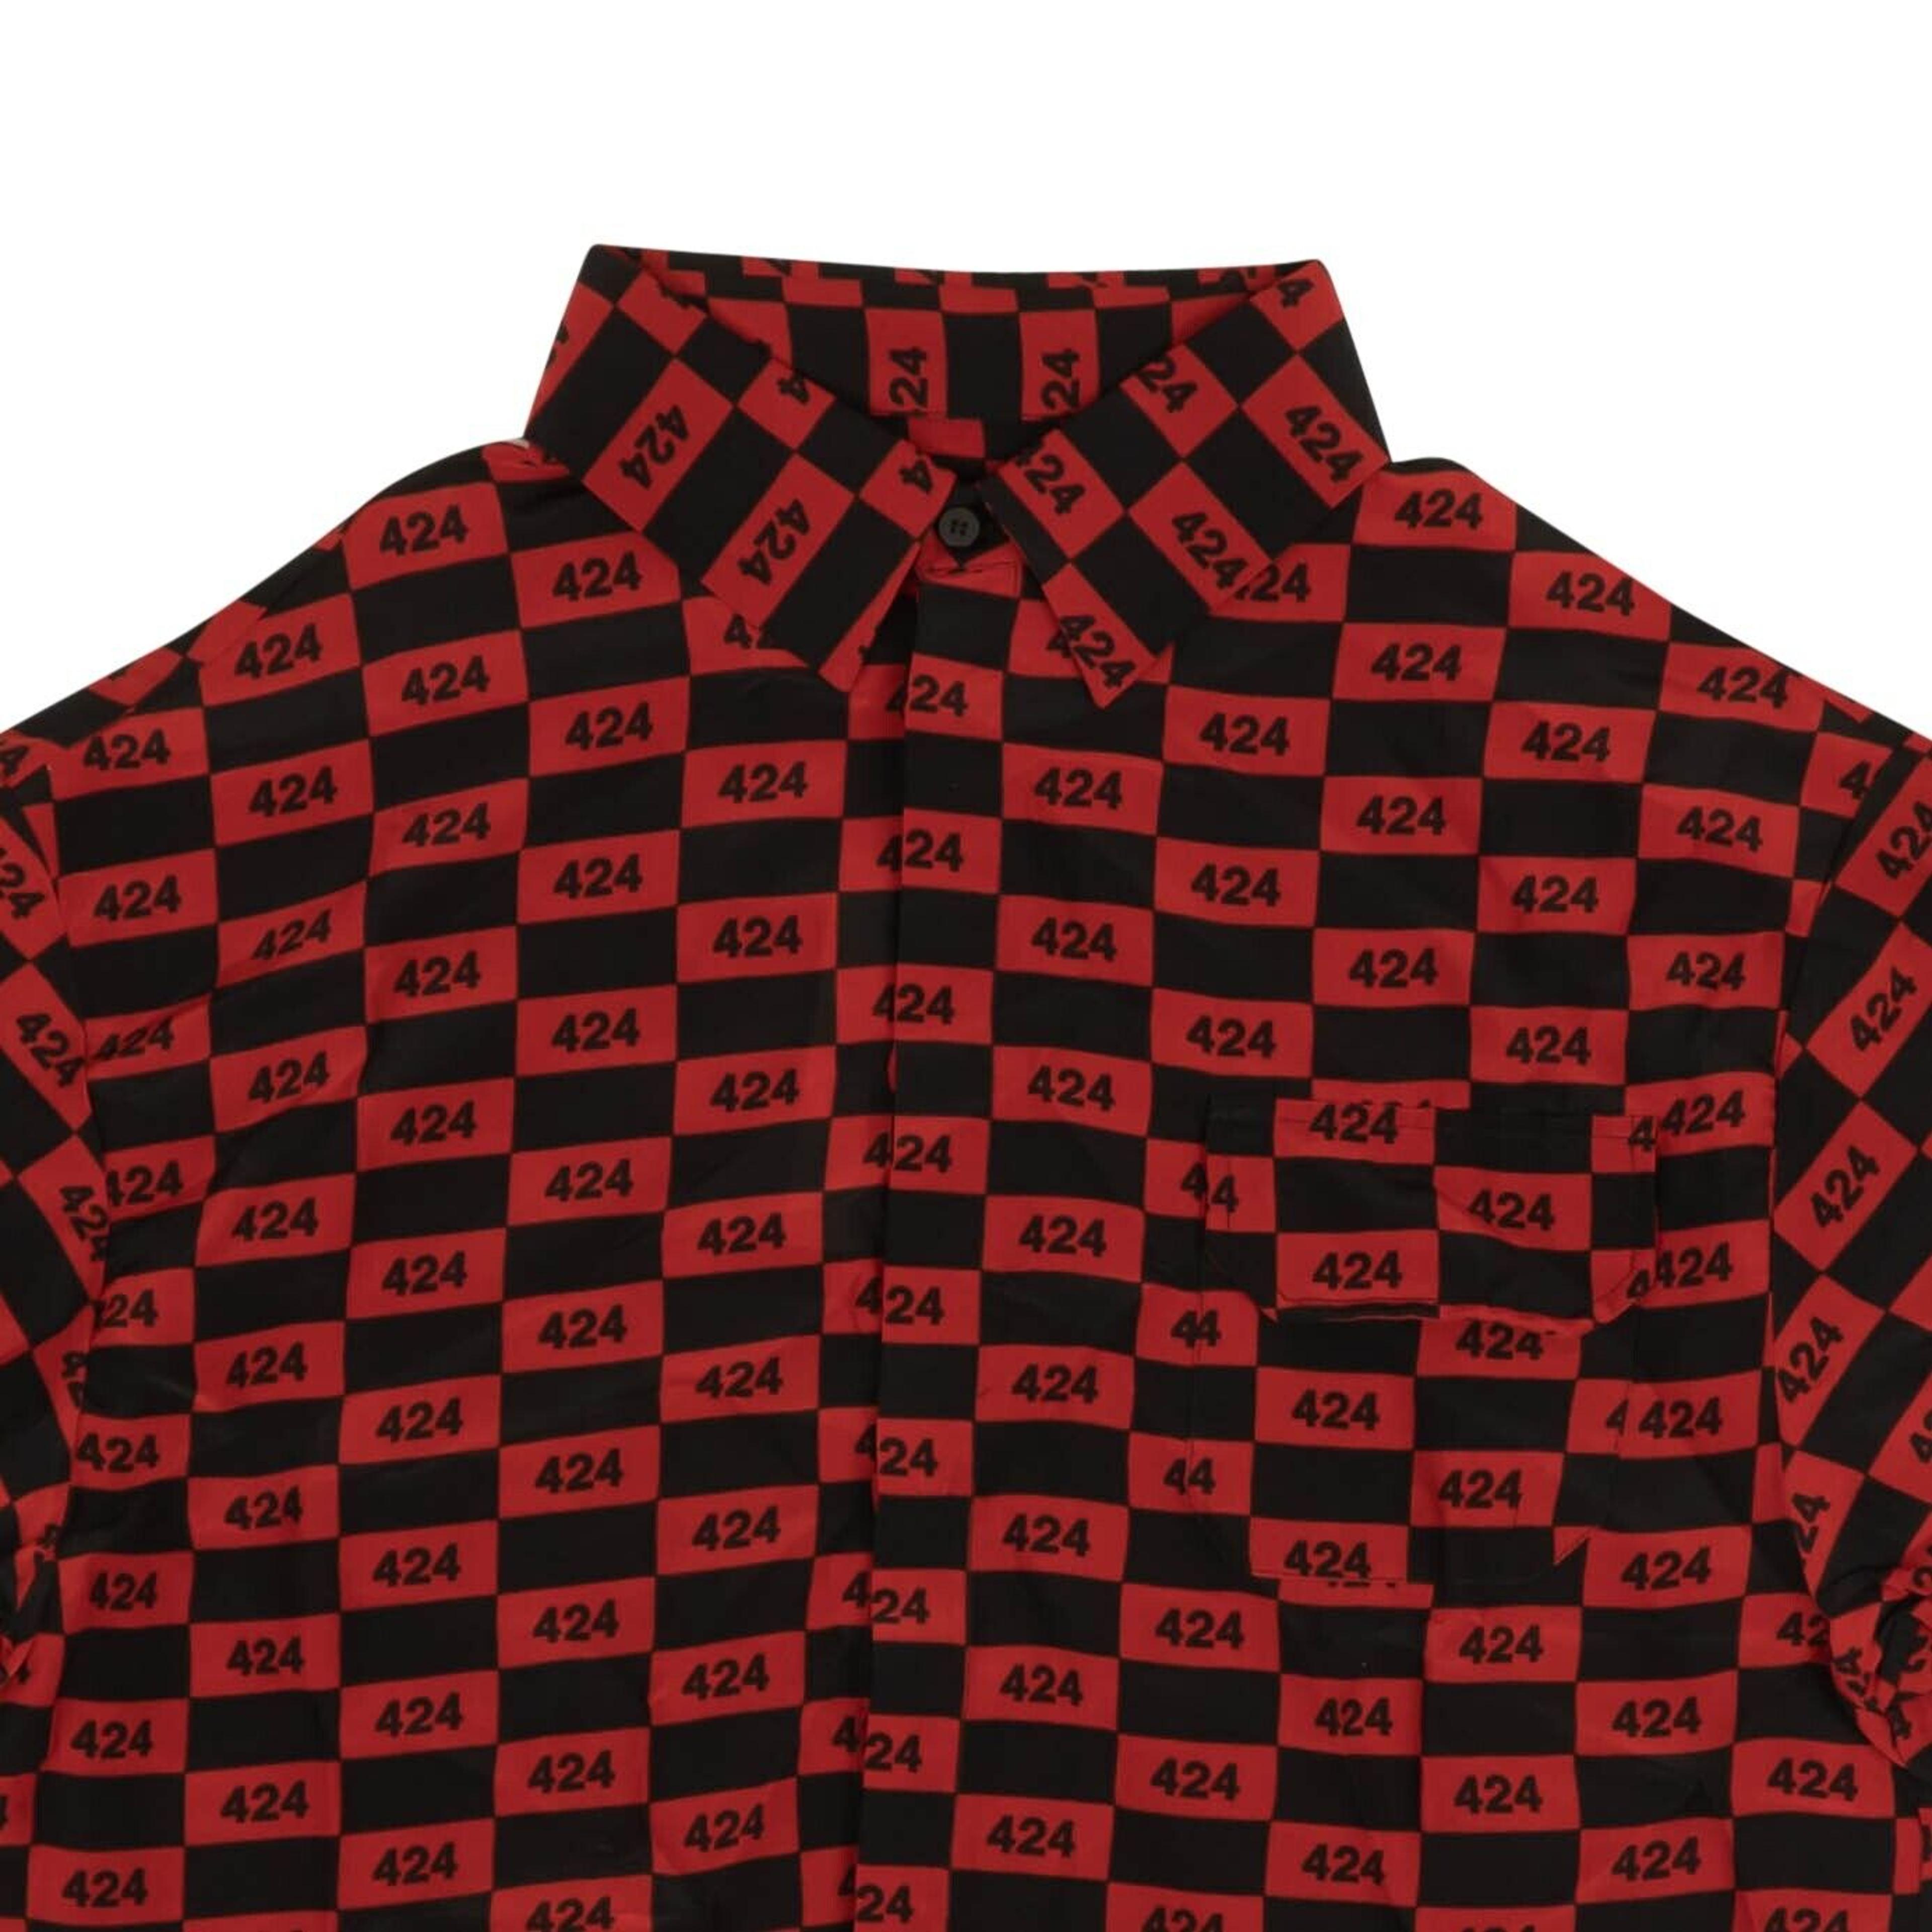 Alternate View 2 of 424 On Fairfax Men'S T-Shirts - Red/Black